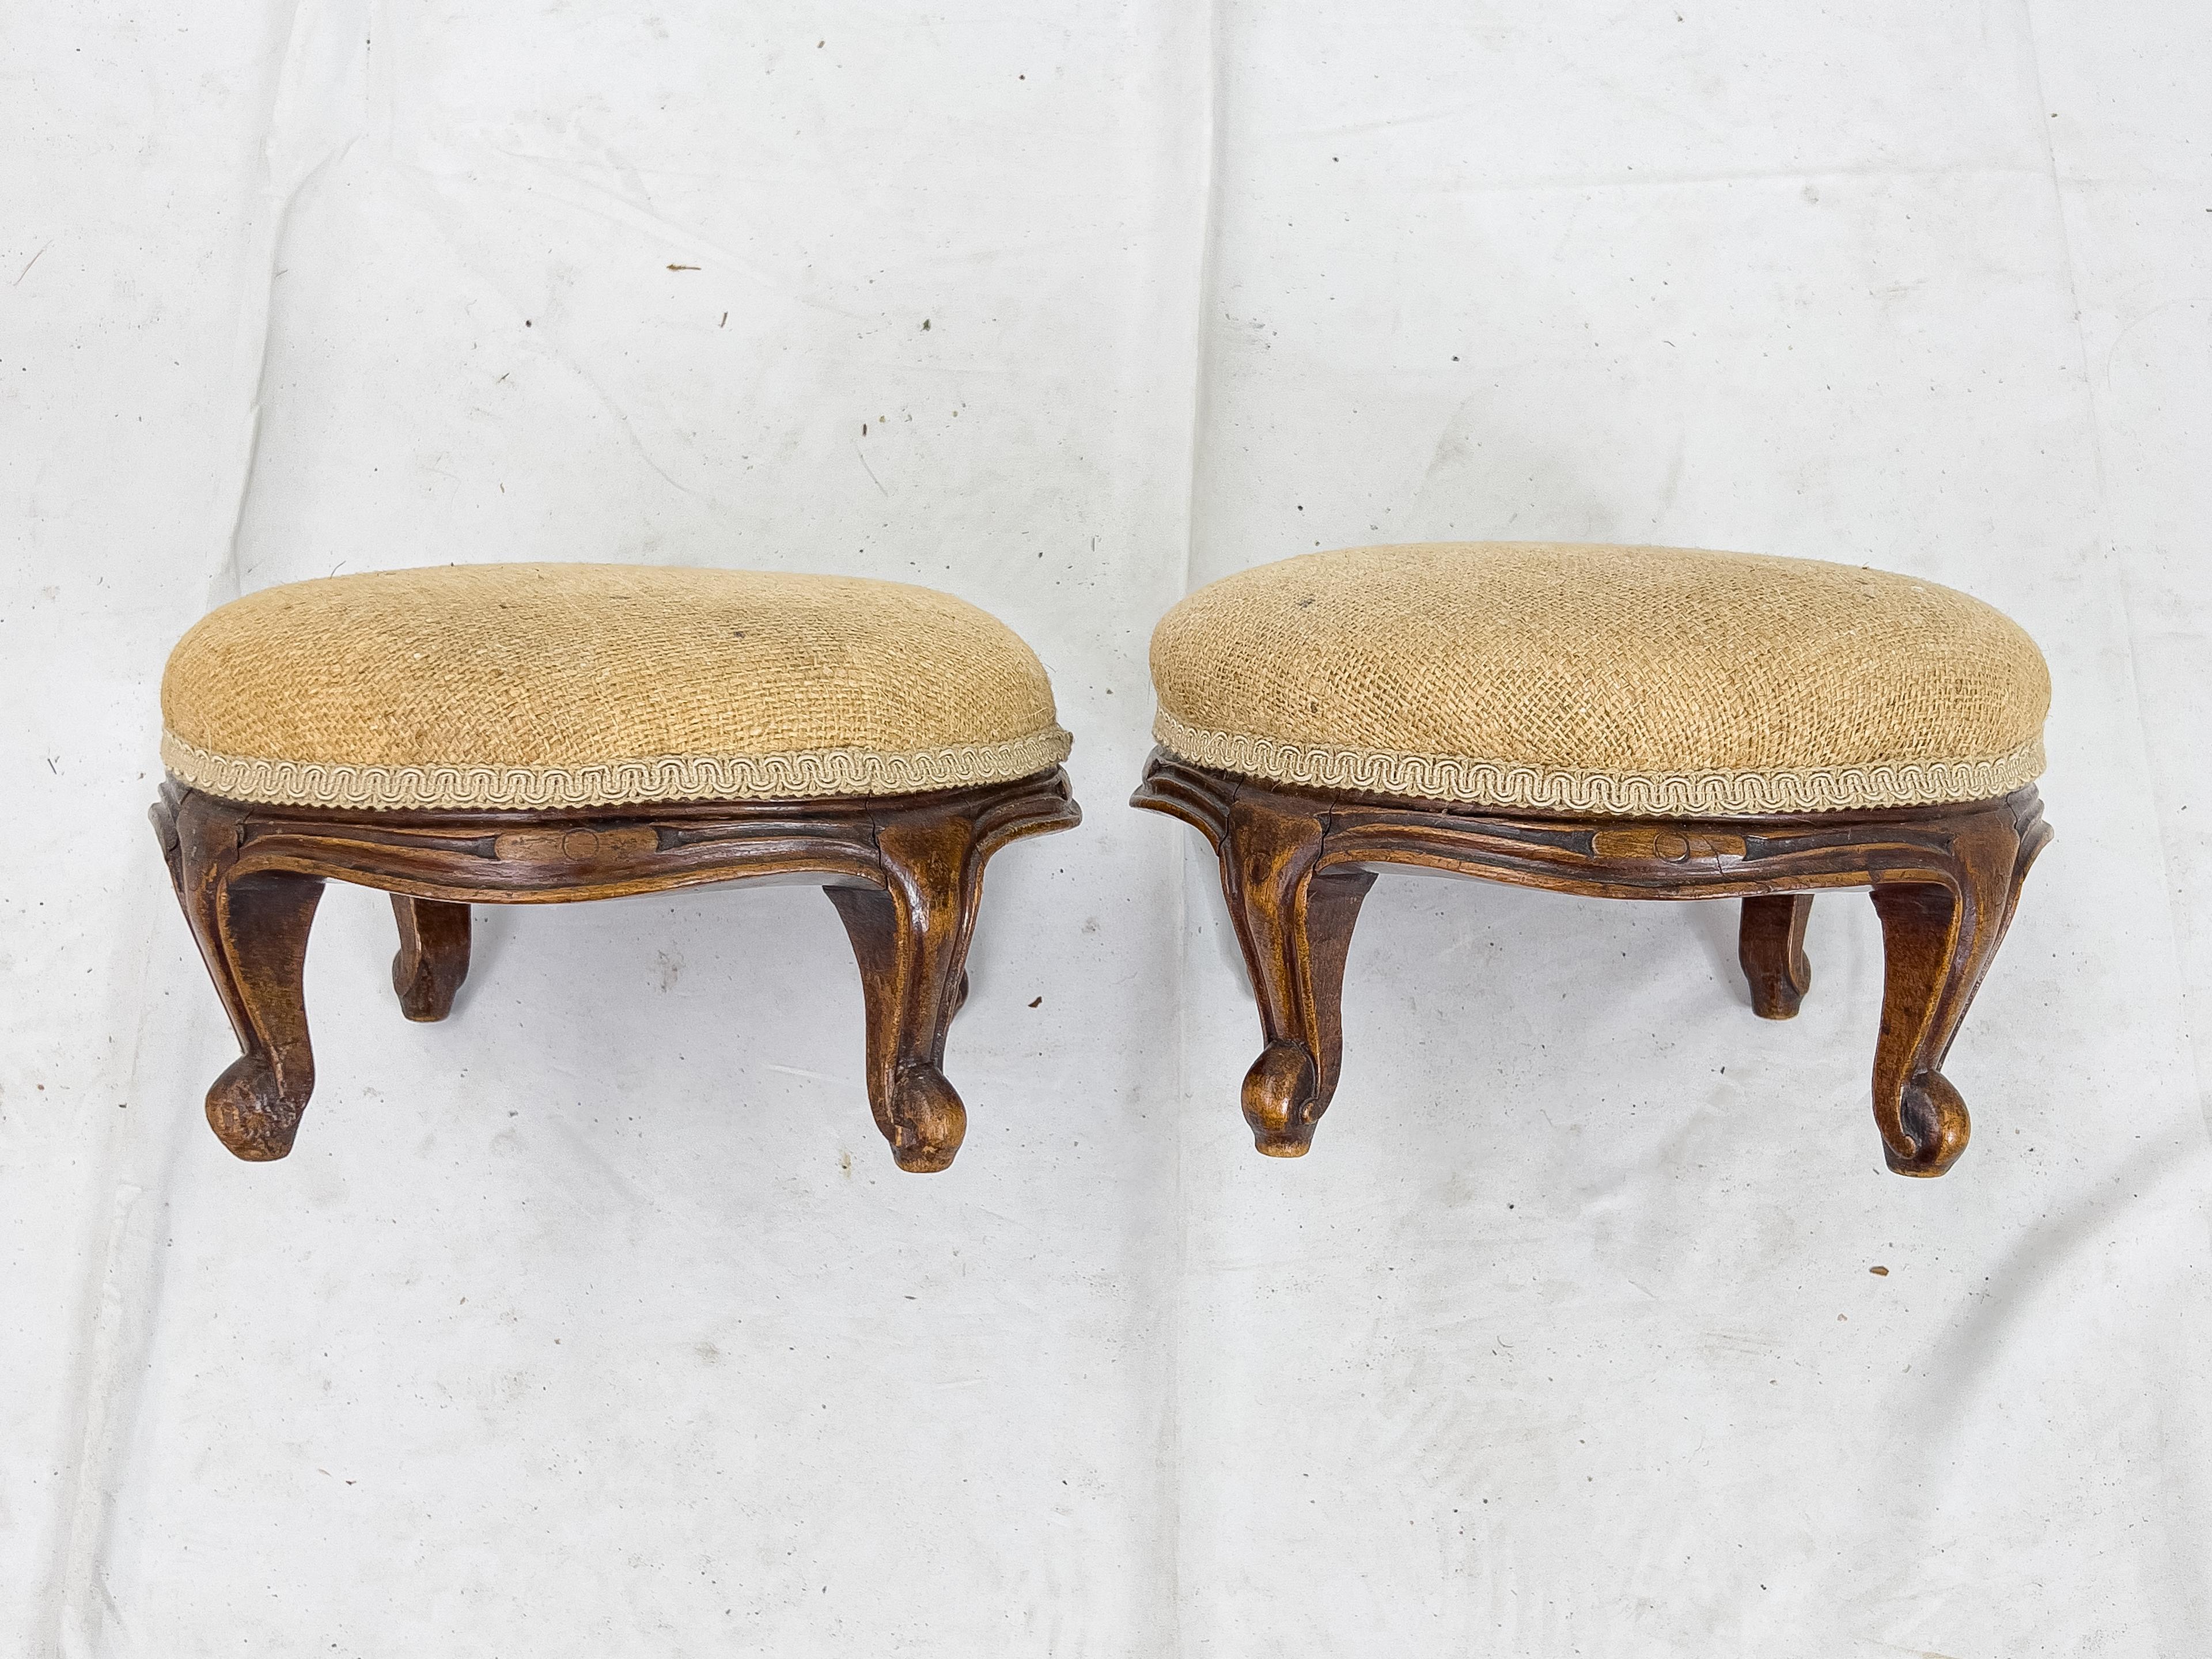 Pair of Small 19th Century Louis XV Style French Walnut and Burlap Foot Stools For Sale 3